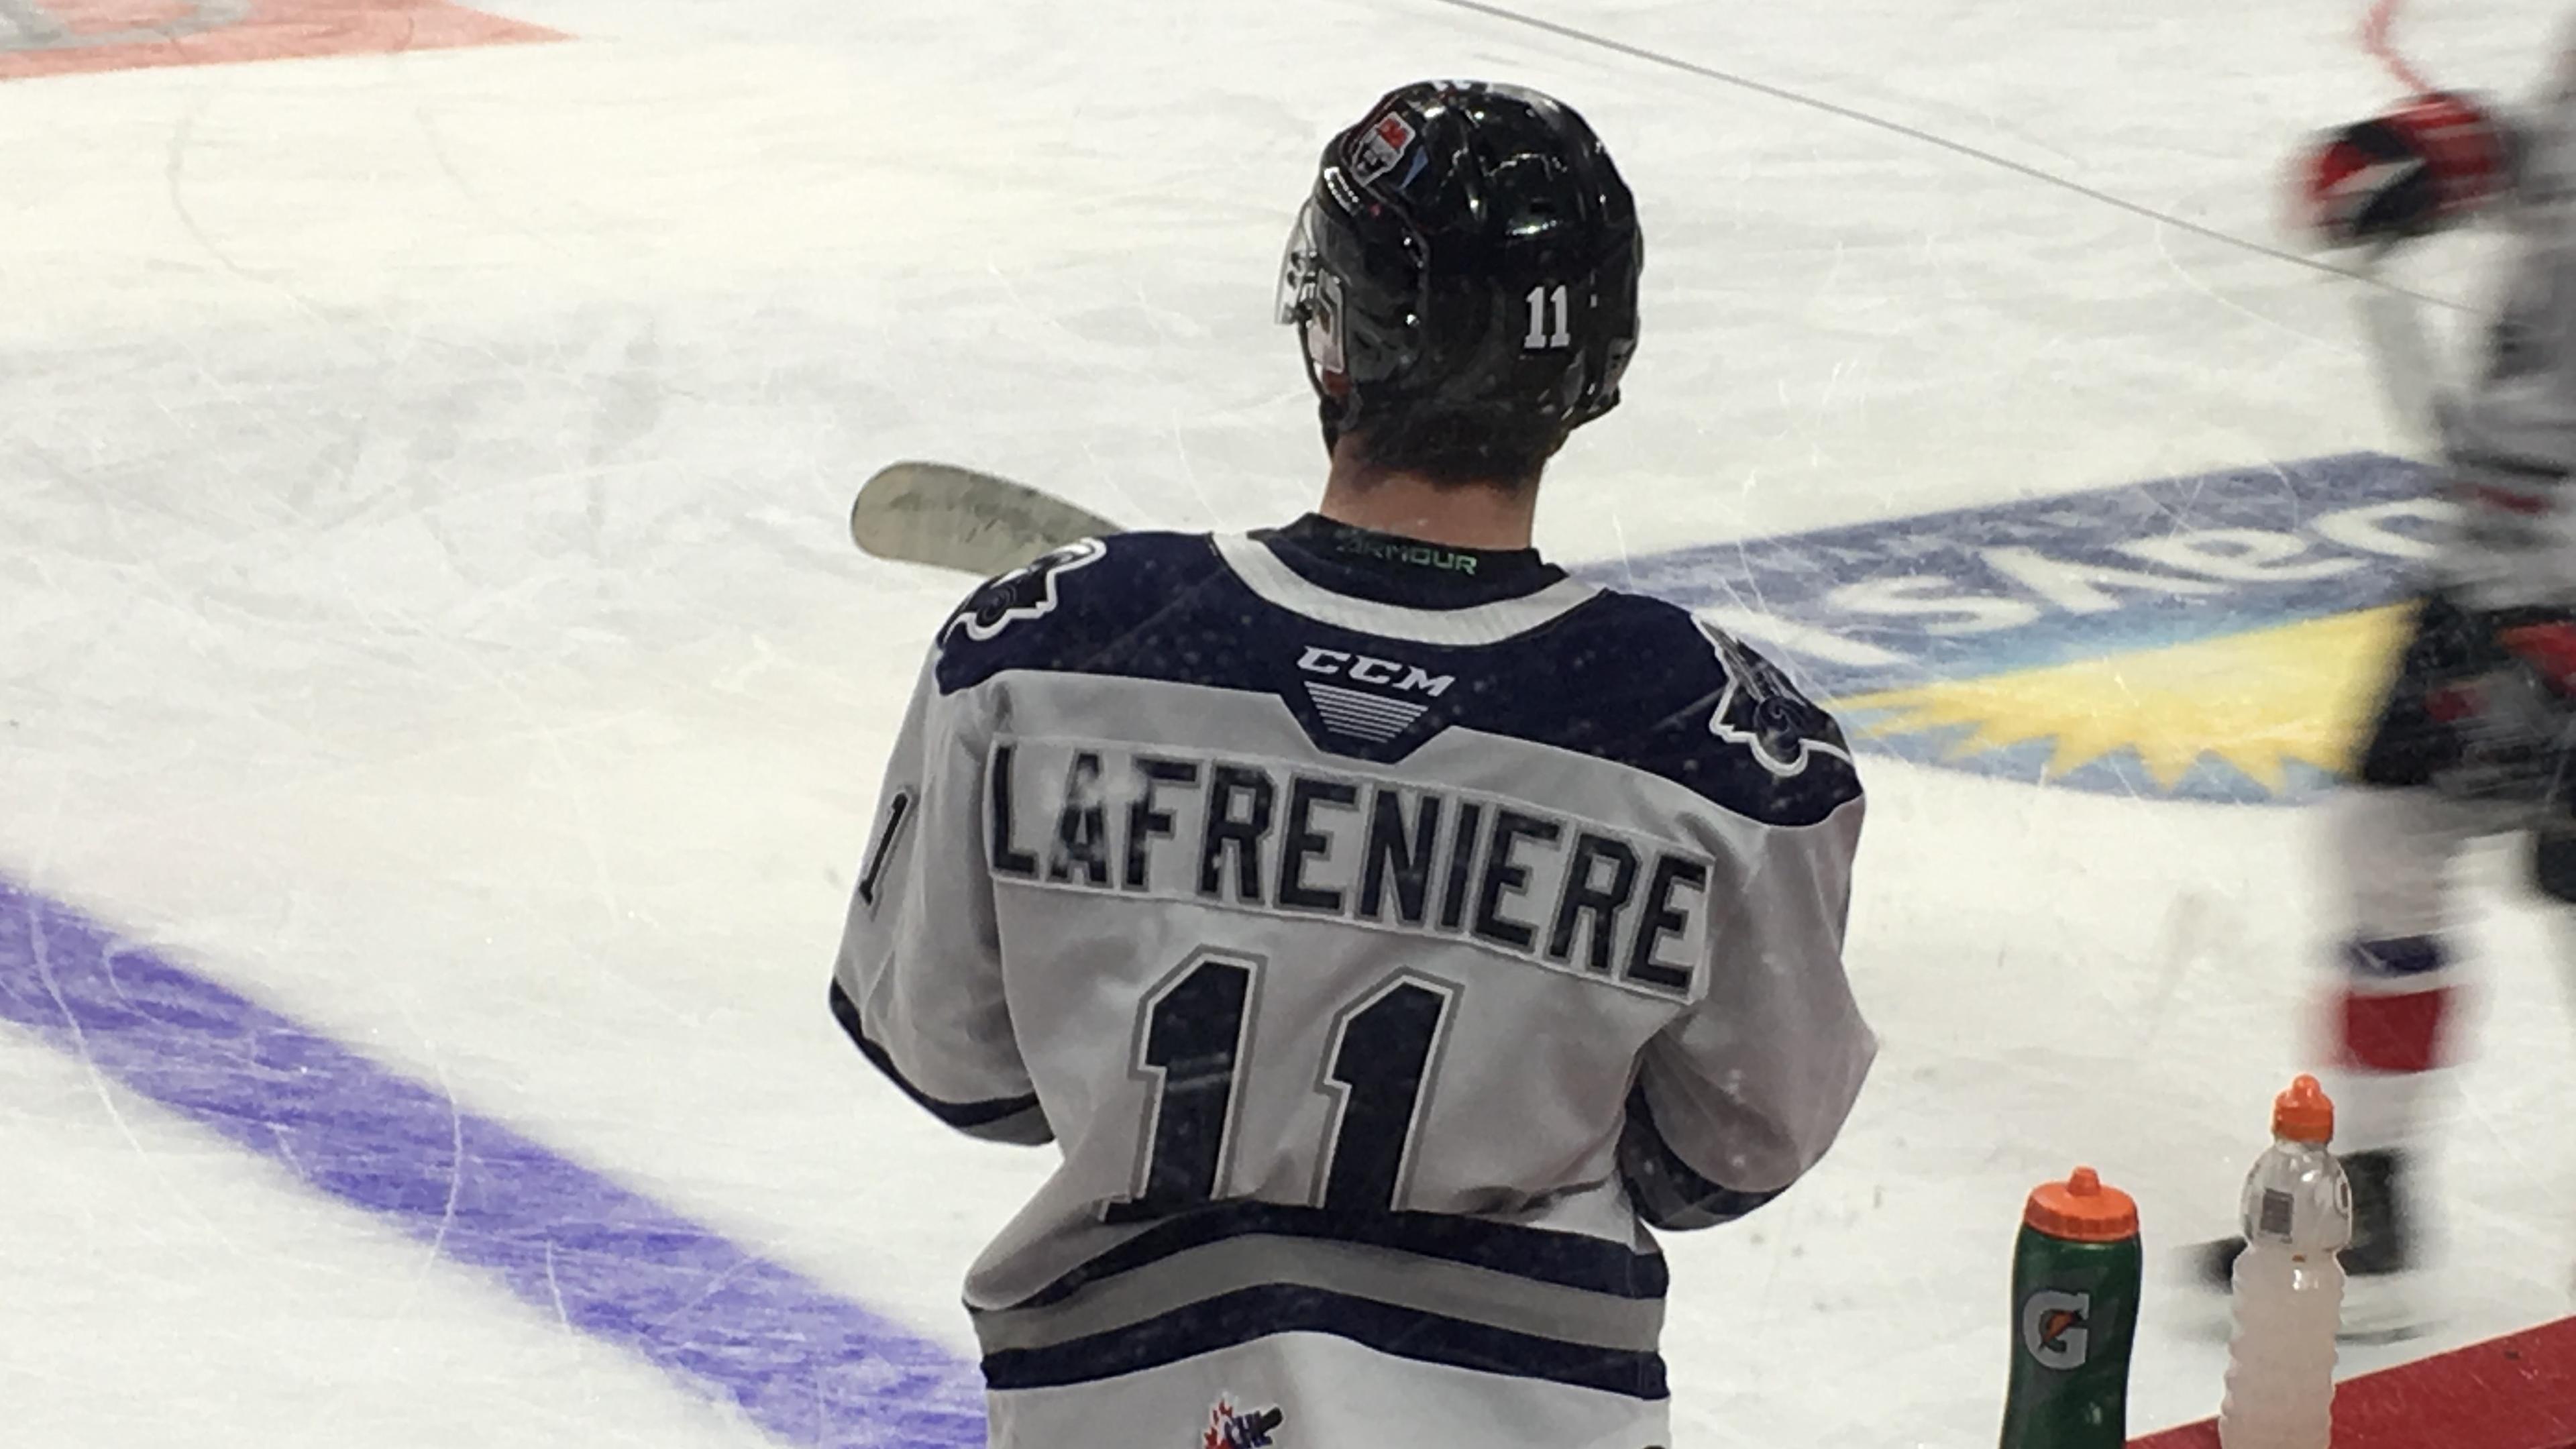 Alexis Lafreniere during warmups at the 2020 Kubota CHL/NHL Top Prospects Game in Hamilton, Ontario. - January 16, 2020 / <a href="http://https://creativecommons.org/licenses/by-sa/4.0/deed.en">RoadTrippinHockey via Creative Commons License</a>